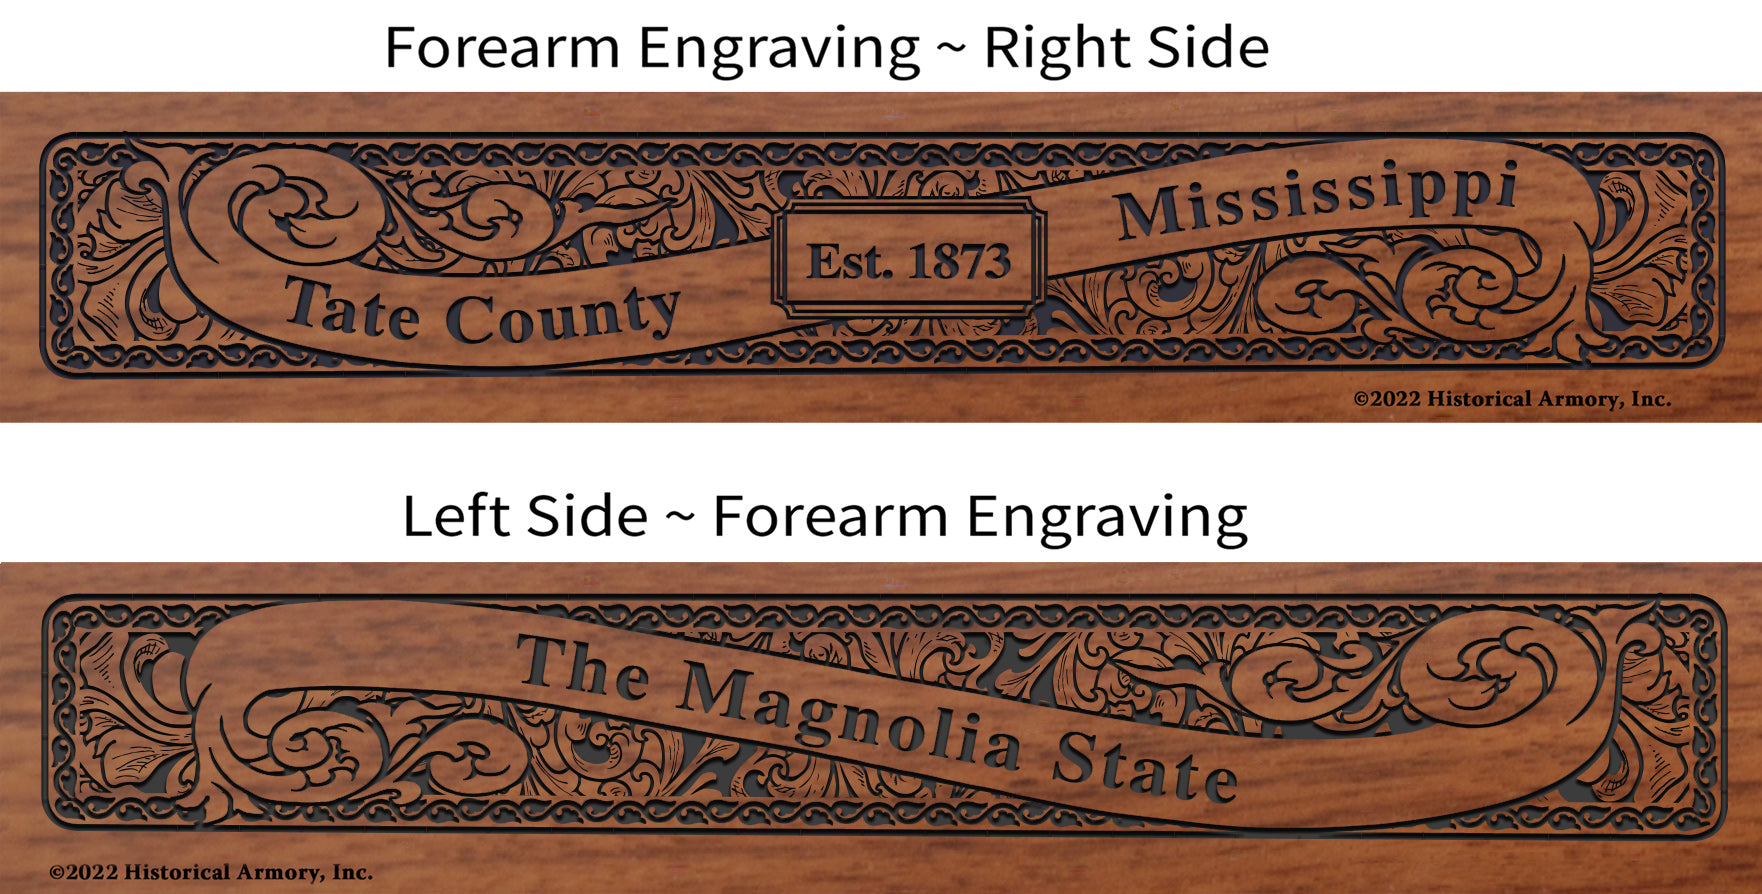 Tate County Mississippi Engraved Rifle Forearm